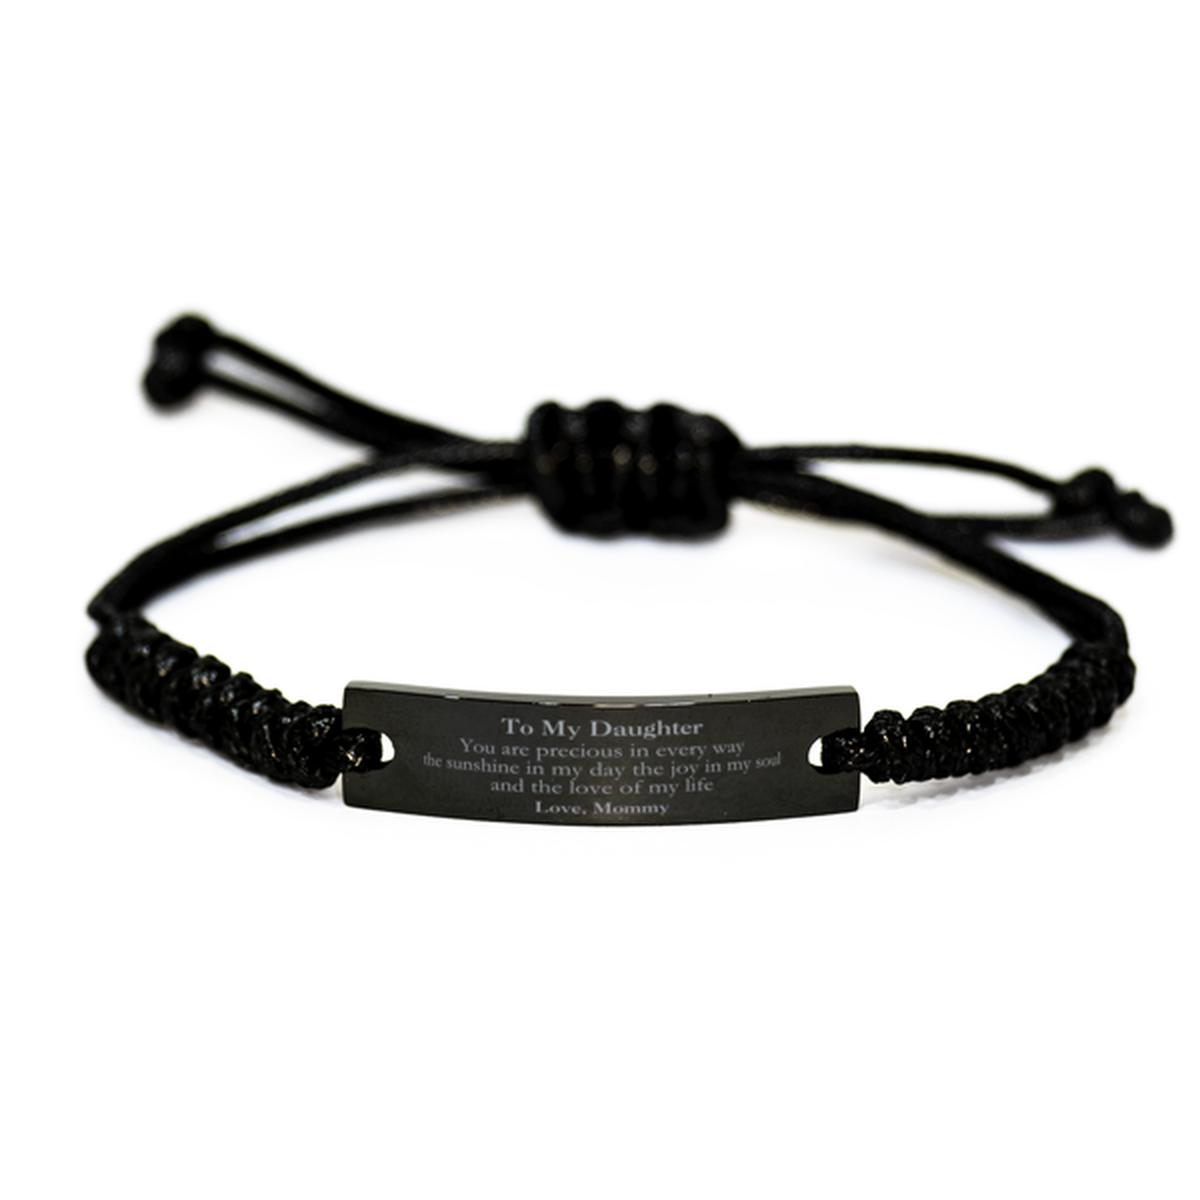 Graduation Gifts for Daughter Black Rope Bracelet Present from Mommy, Christmas Daughter Birthday Gifts Daughter You are precious in every way the sunshine in my day. Love, Mommy